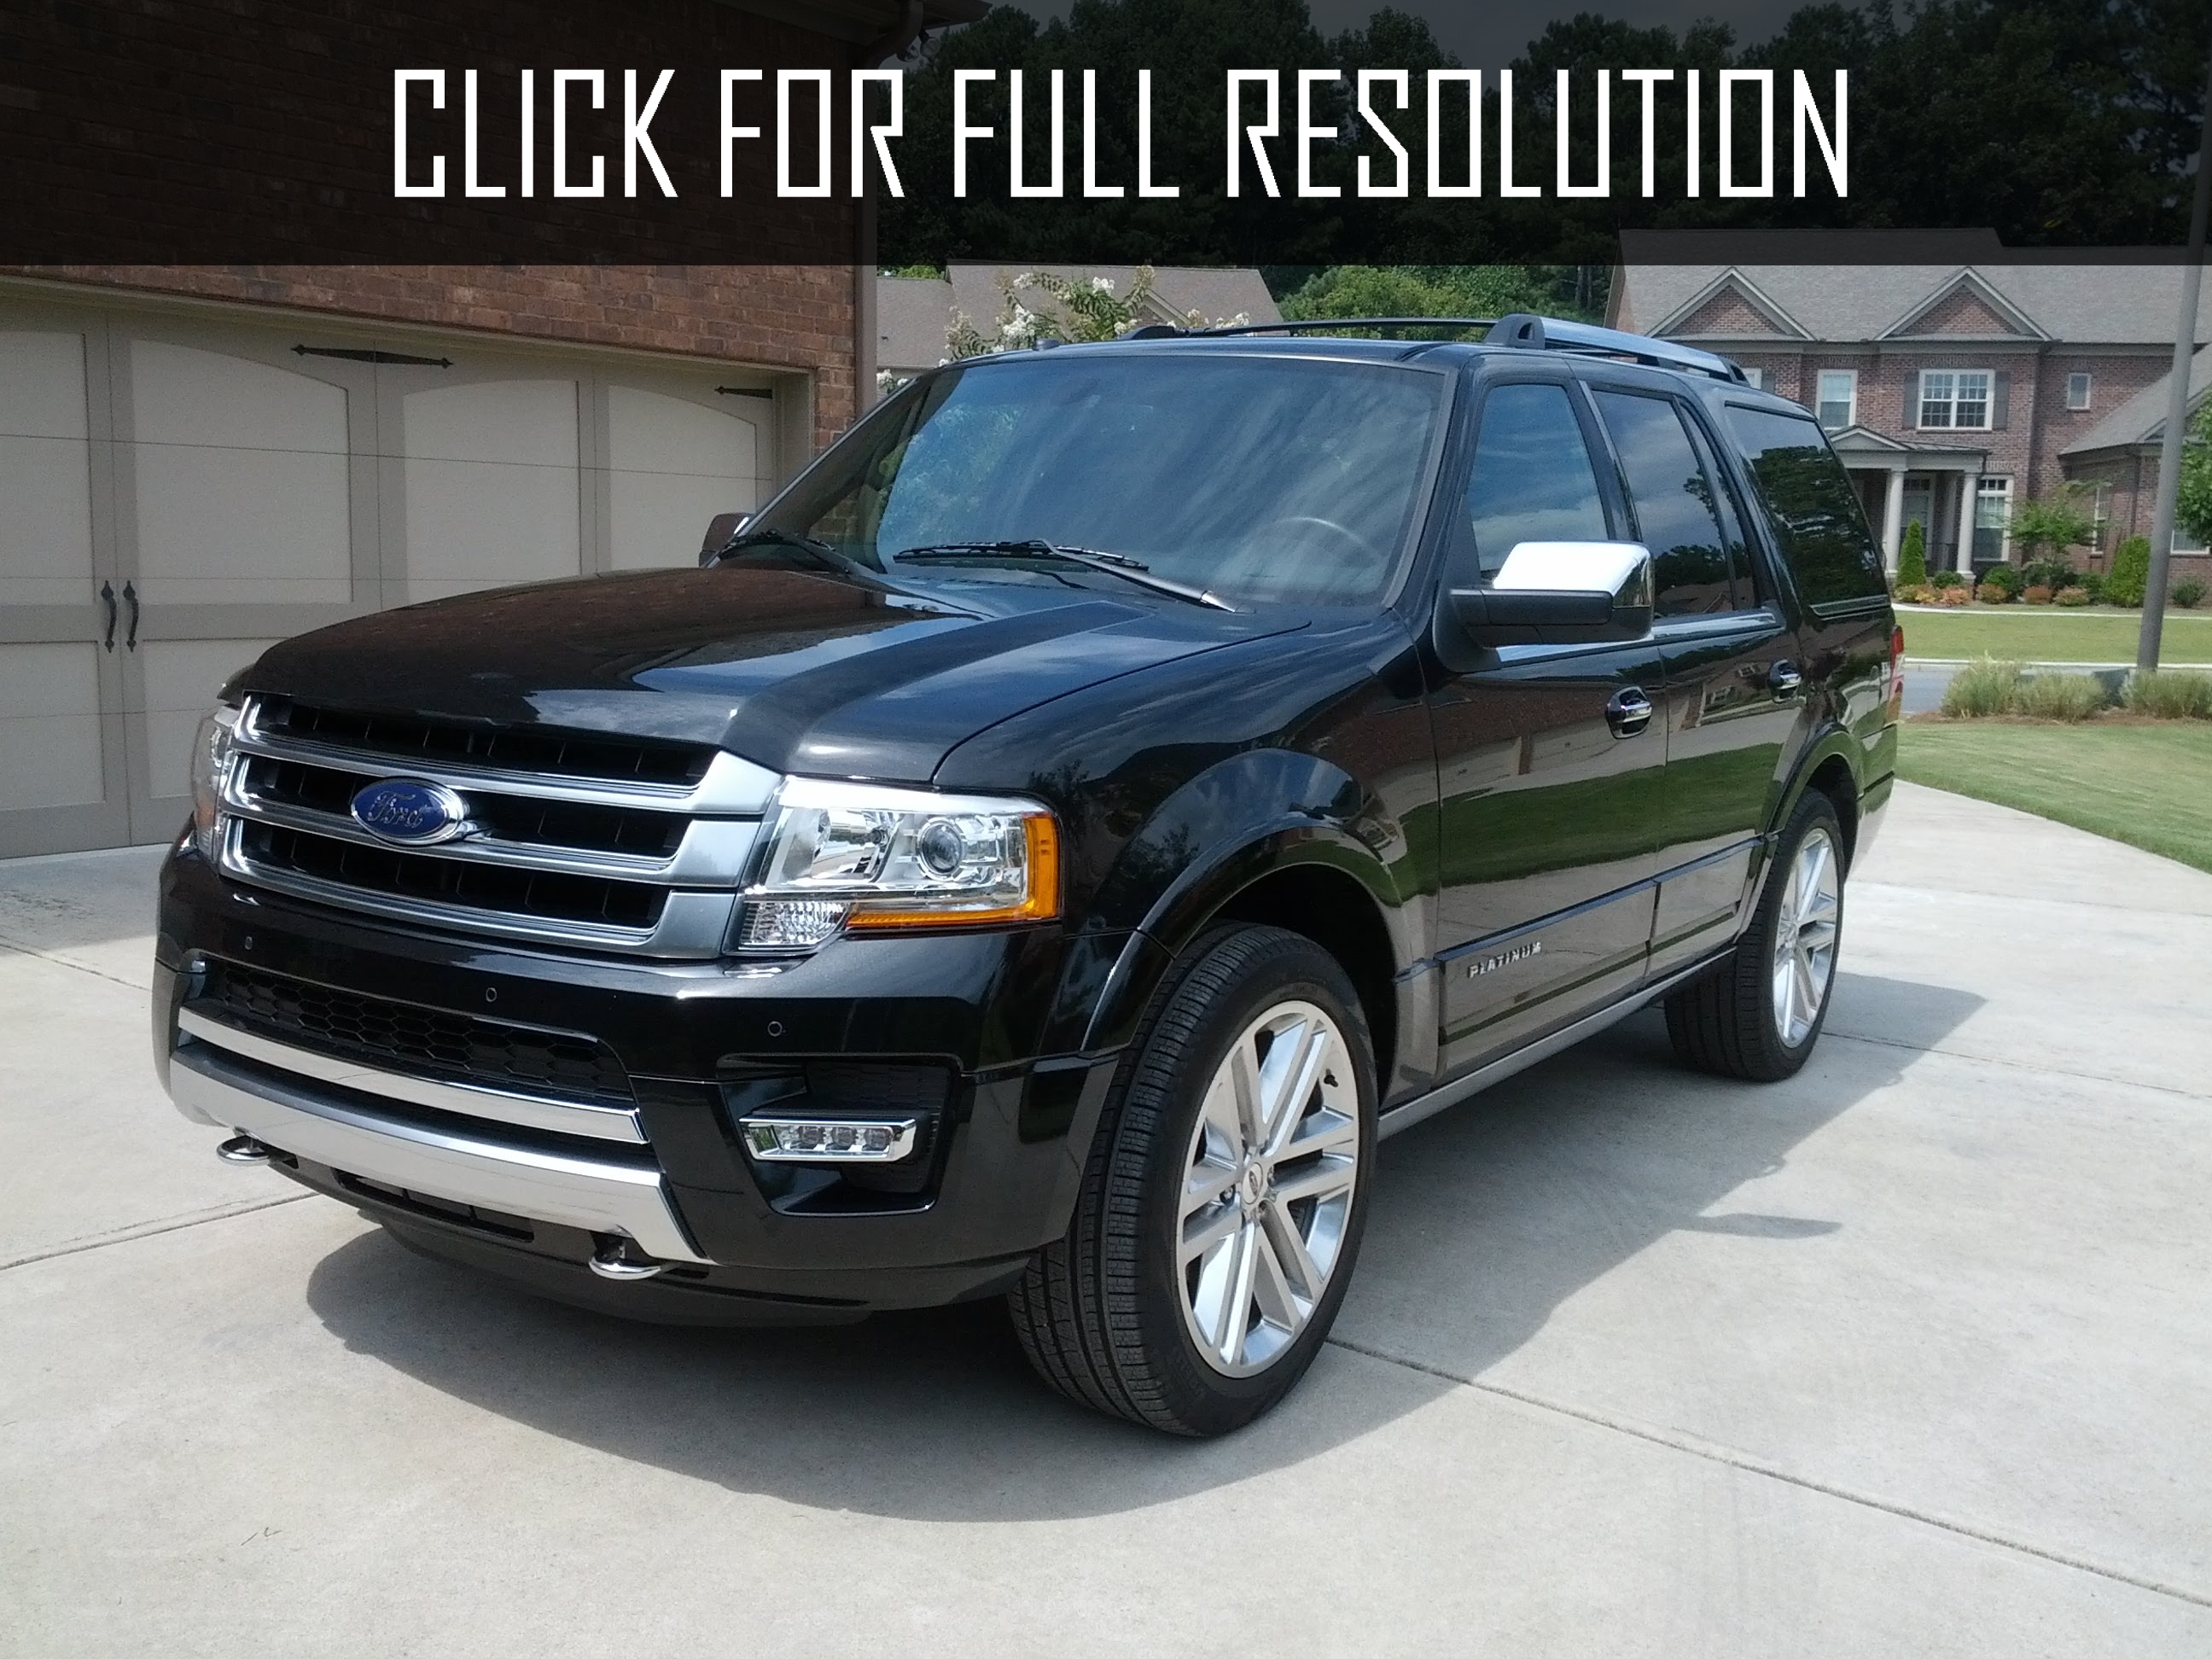 Ford Expedition 4x4